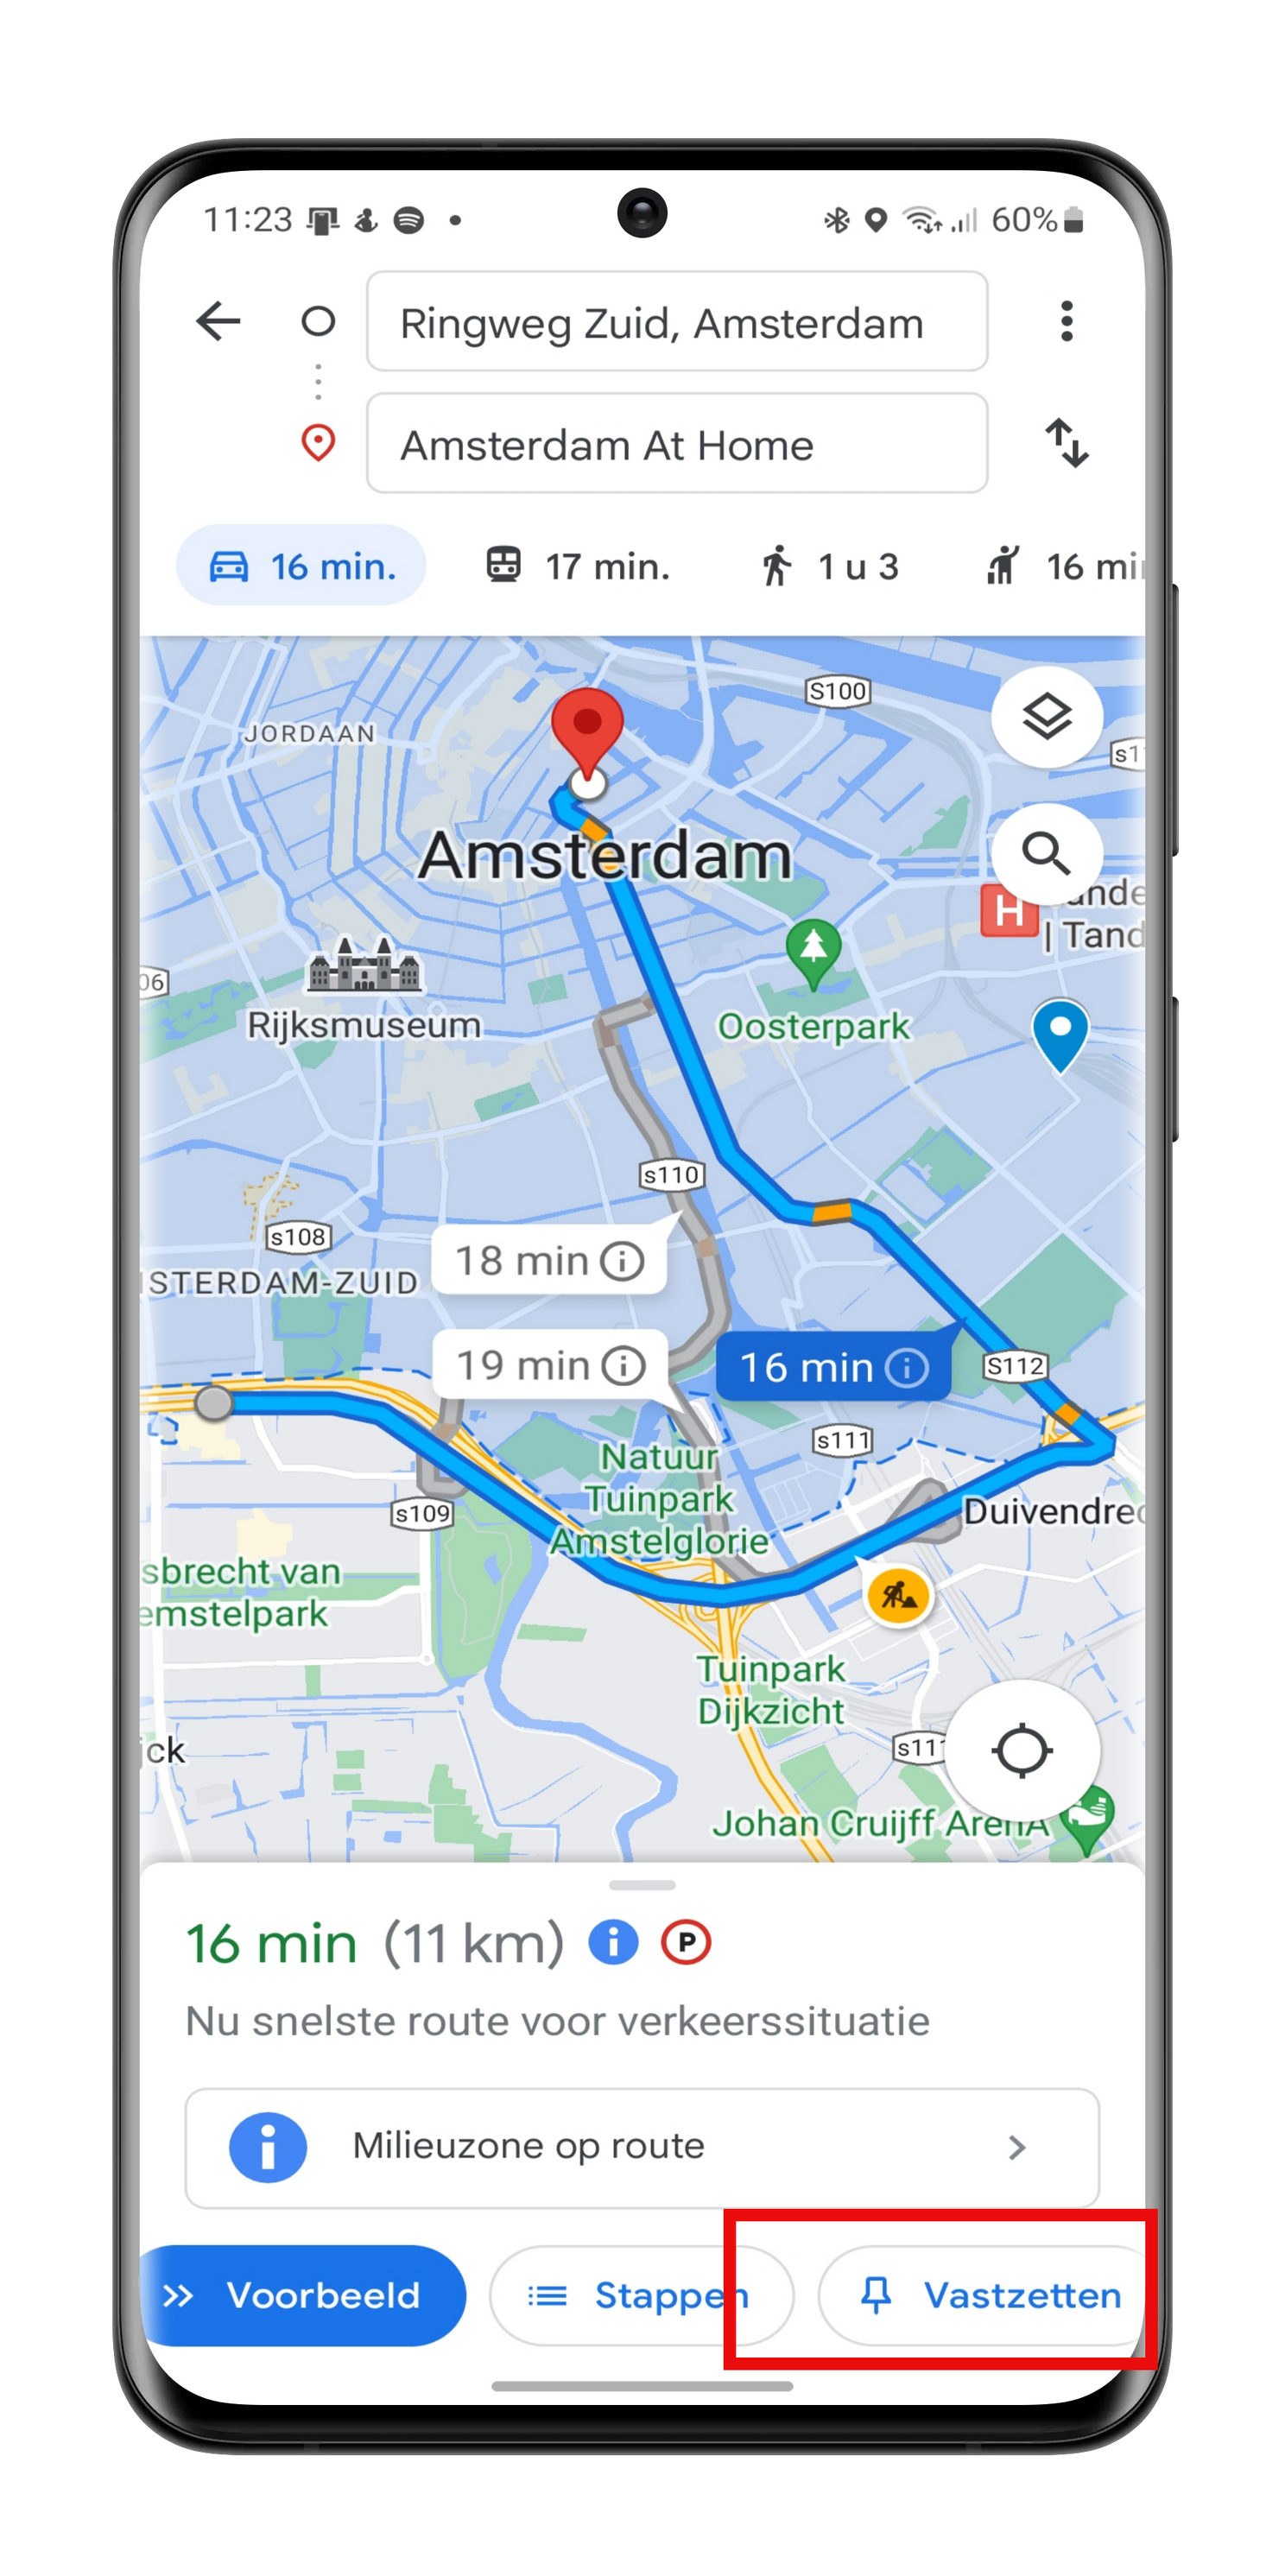 Request a route super fast with Google Maps, that's how it works